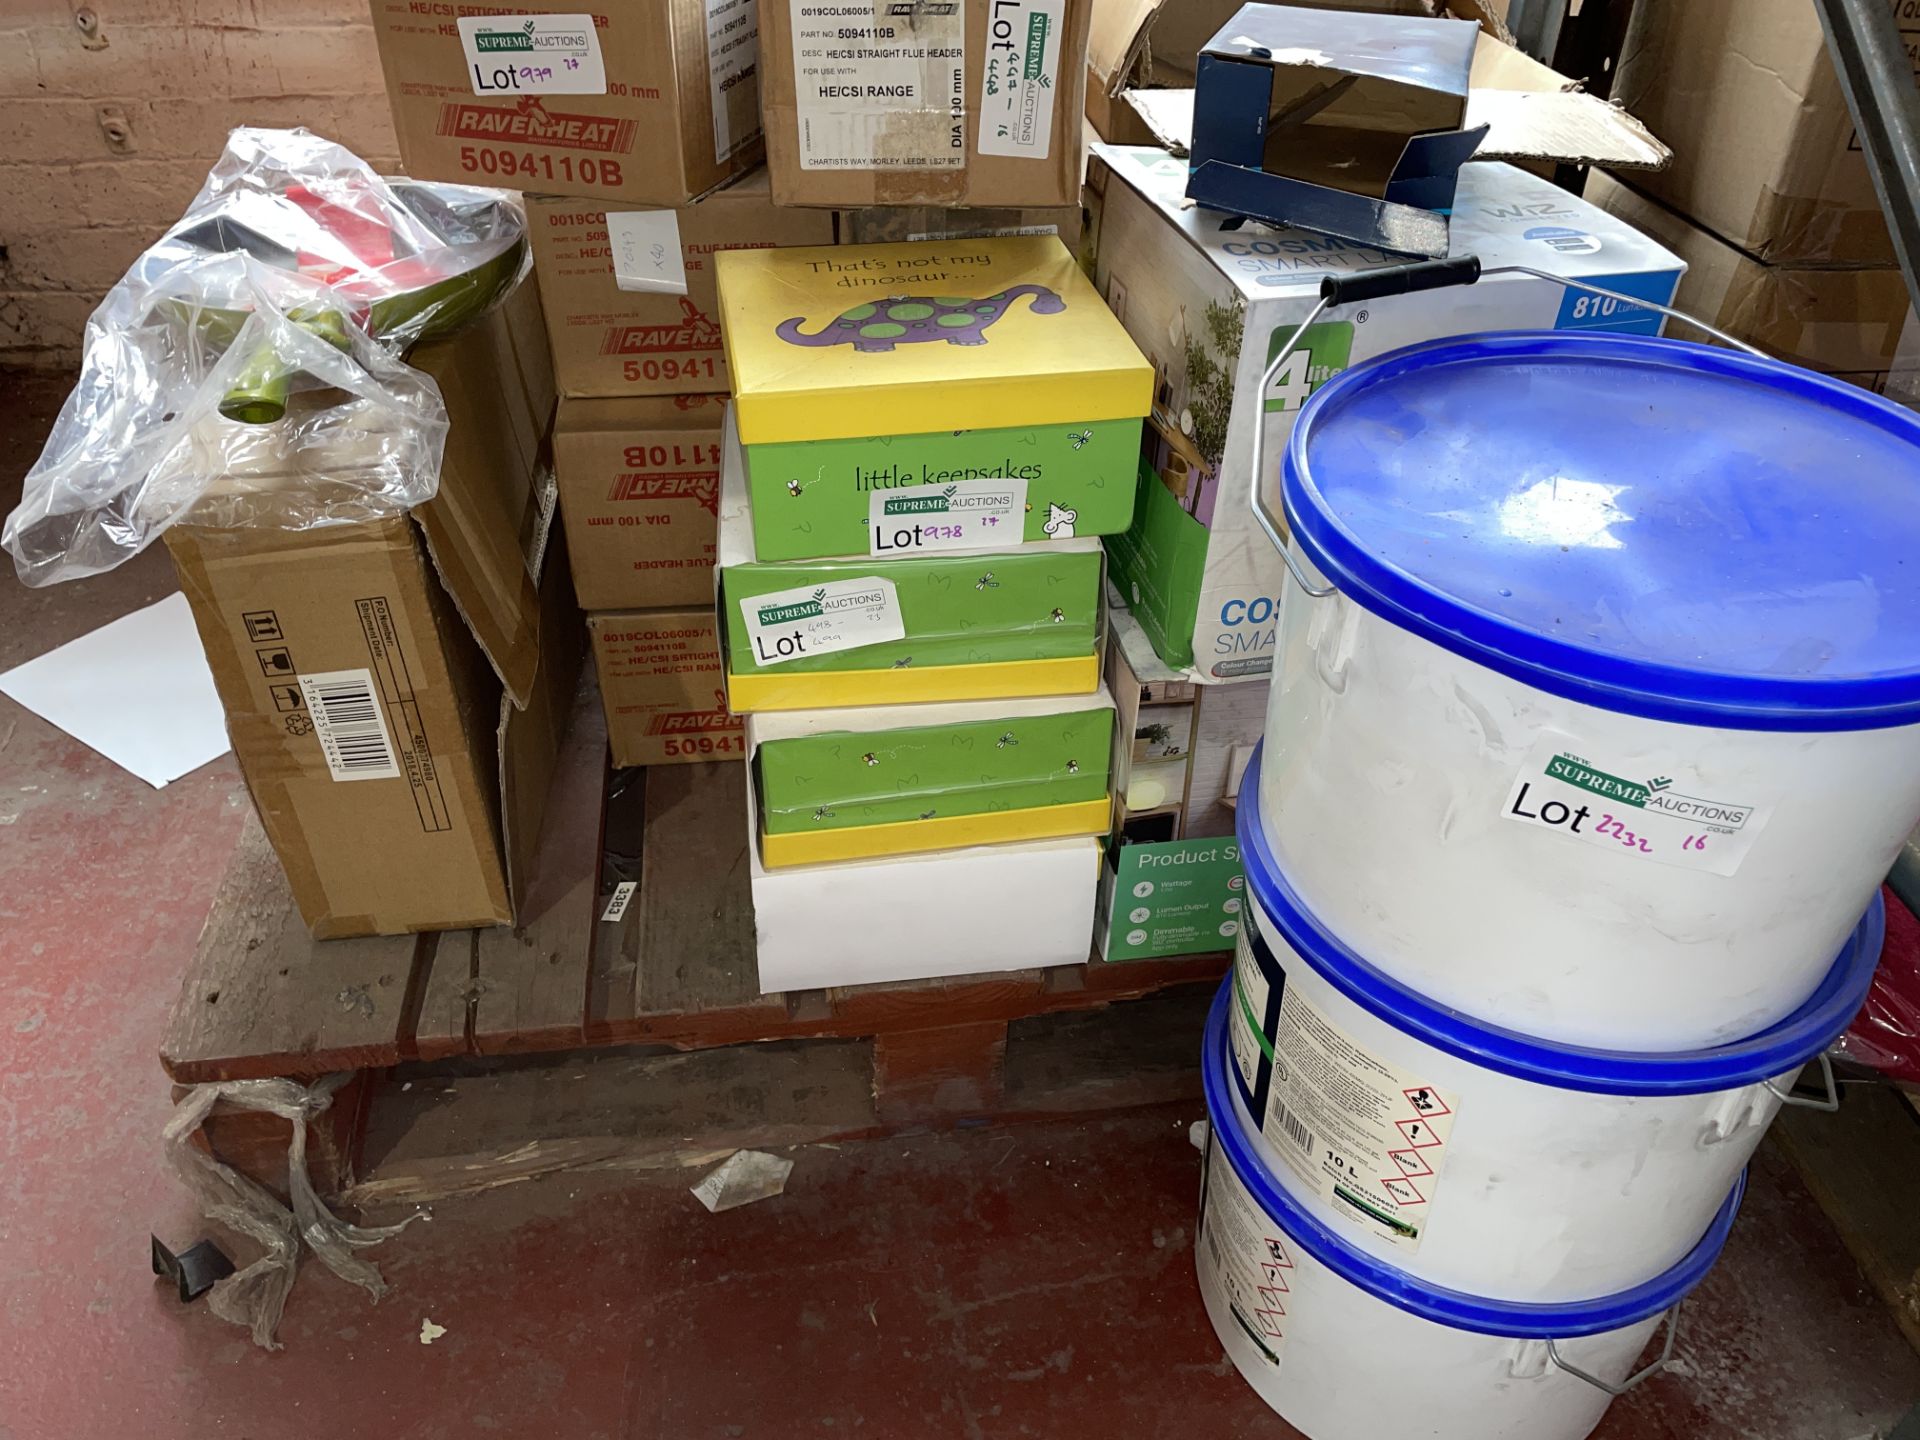 MIXED LOT INCLUDING FRYING PANS, LIGHTS, WATER BASED STRUCTURAL ADHESIVE ETC R16-11